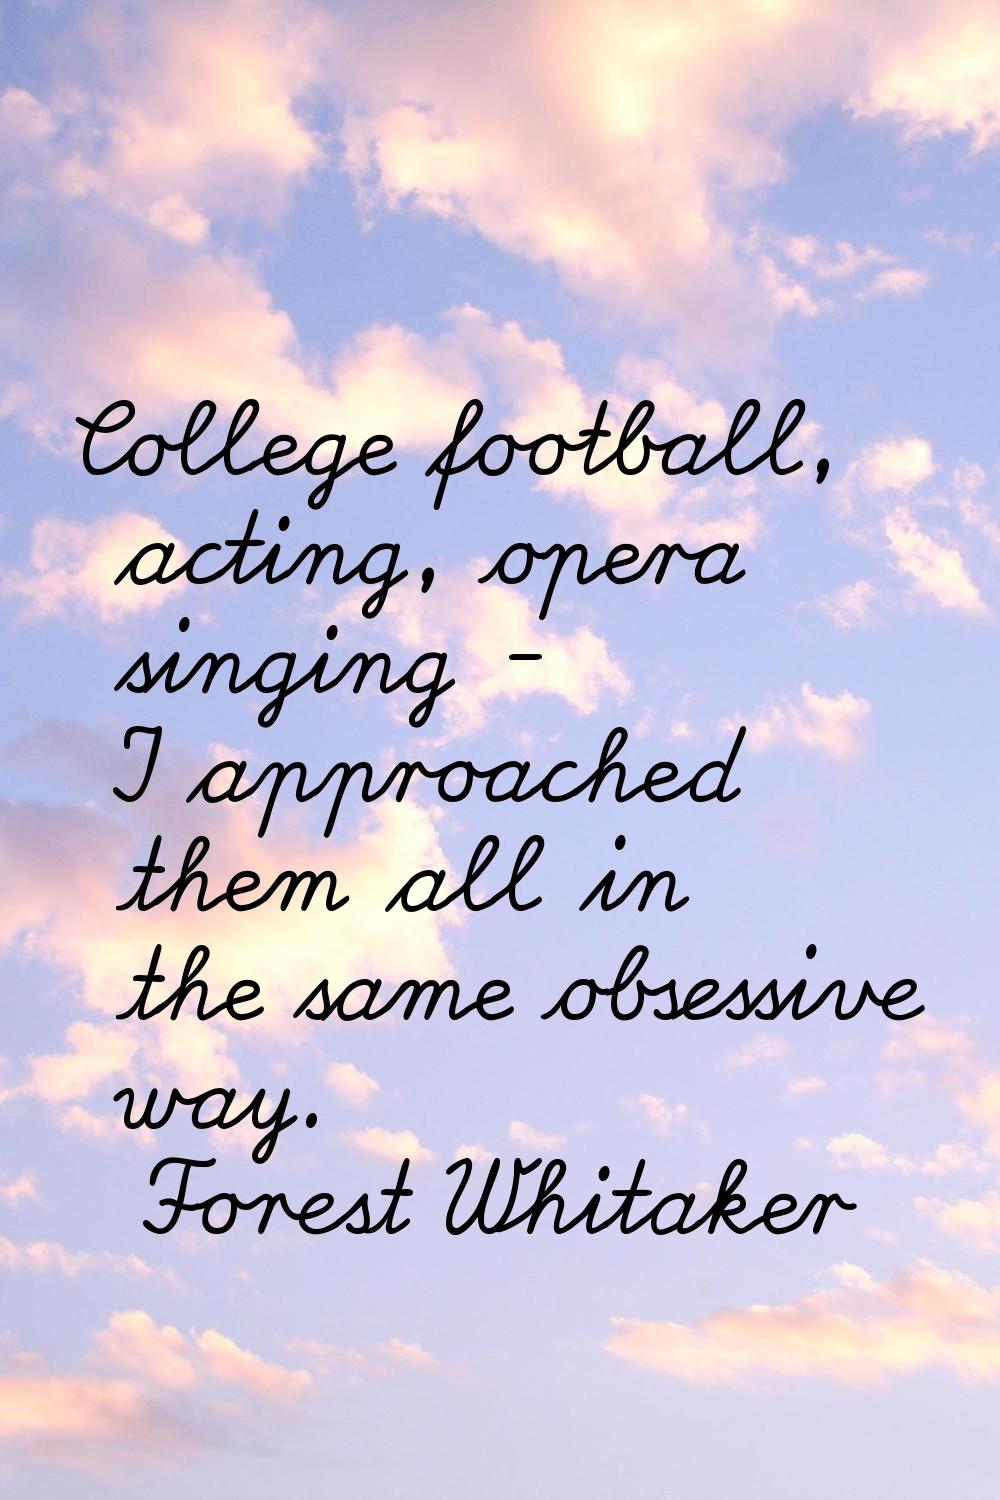 College football, acting, opera singing - I approached them all in the same obsessive way.